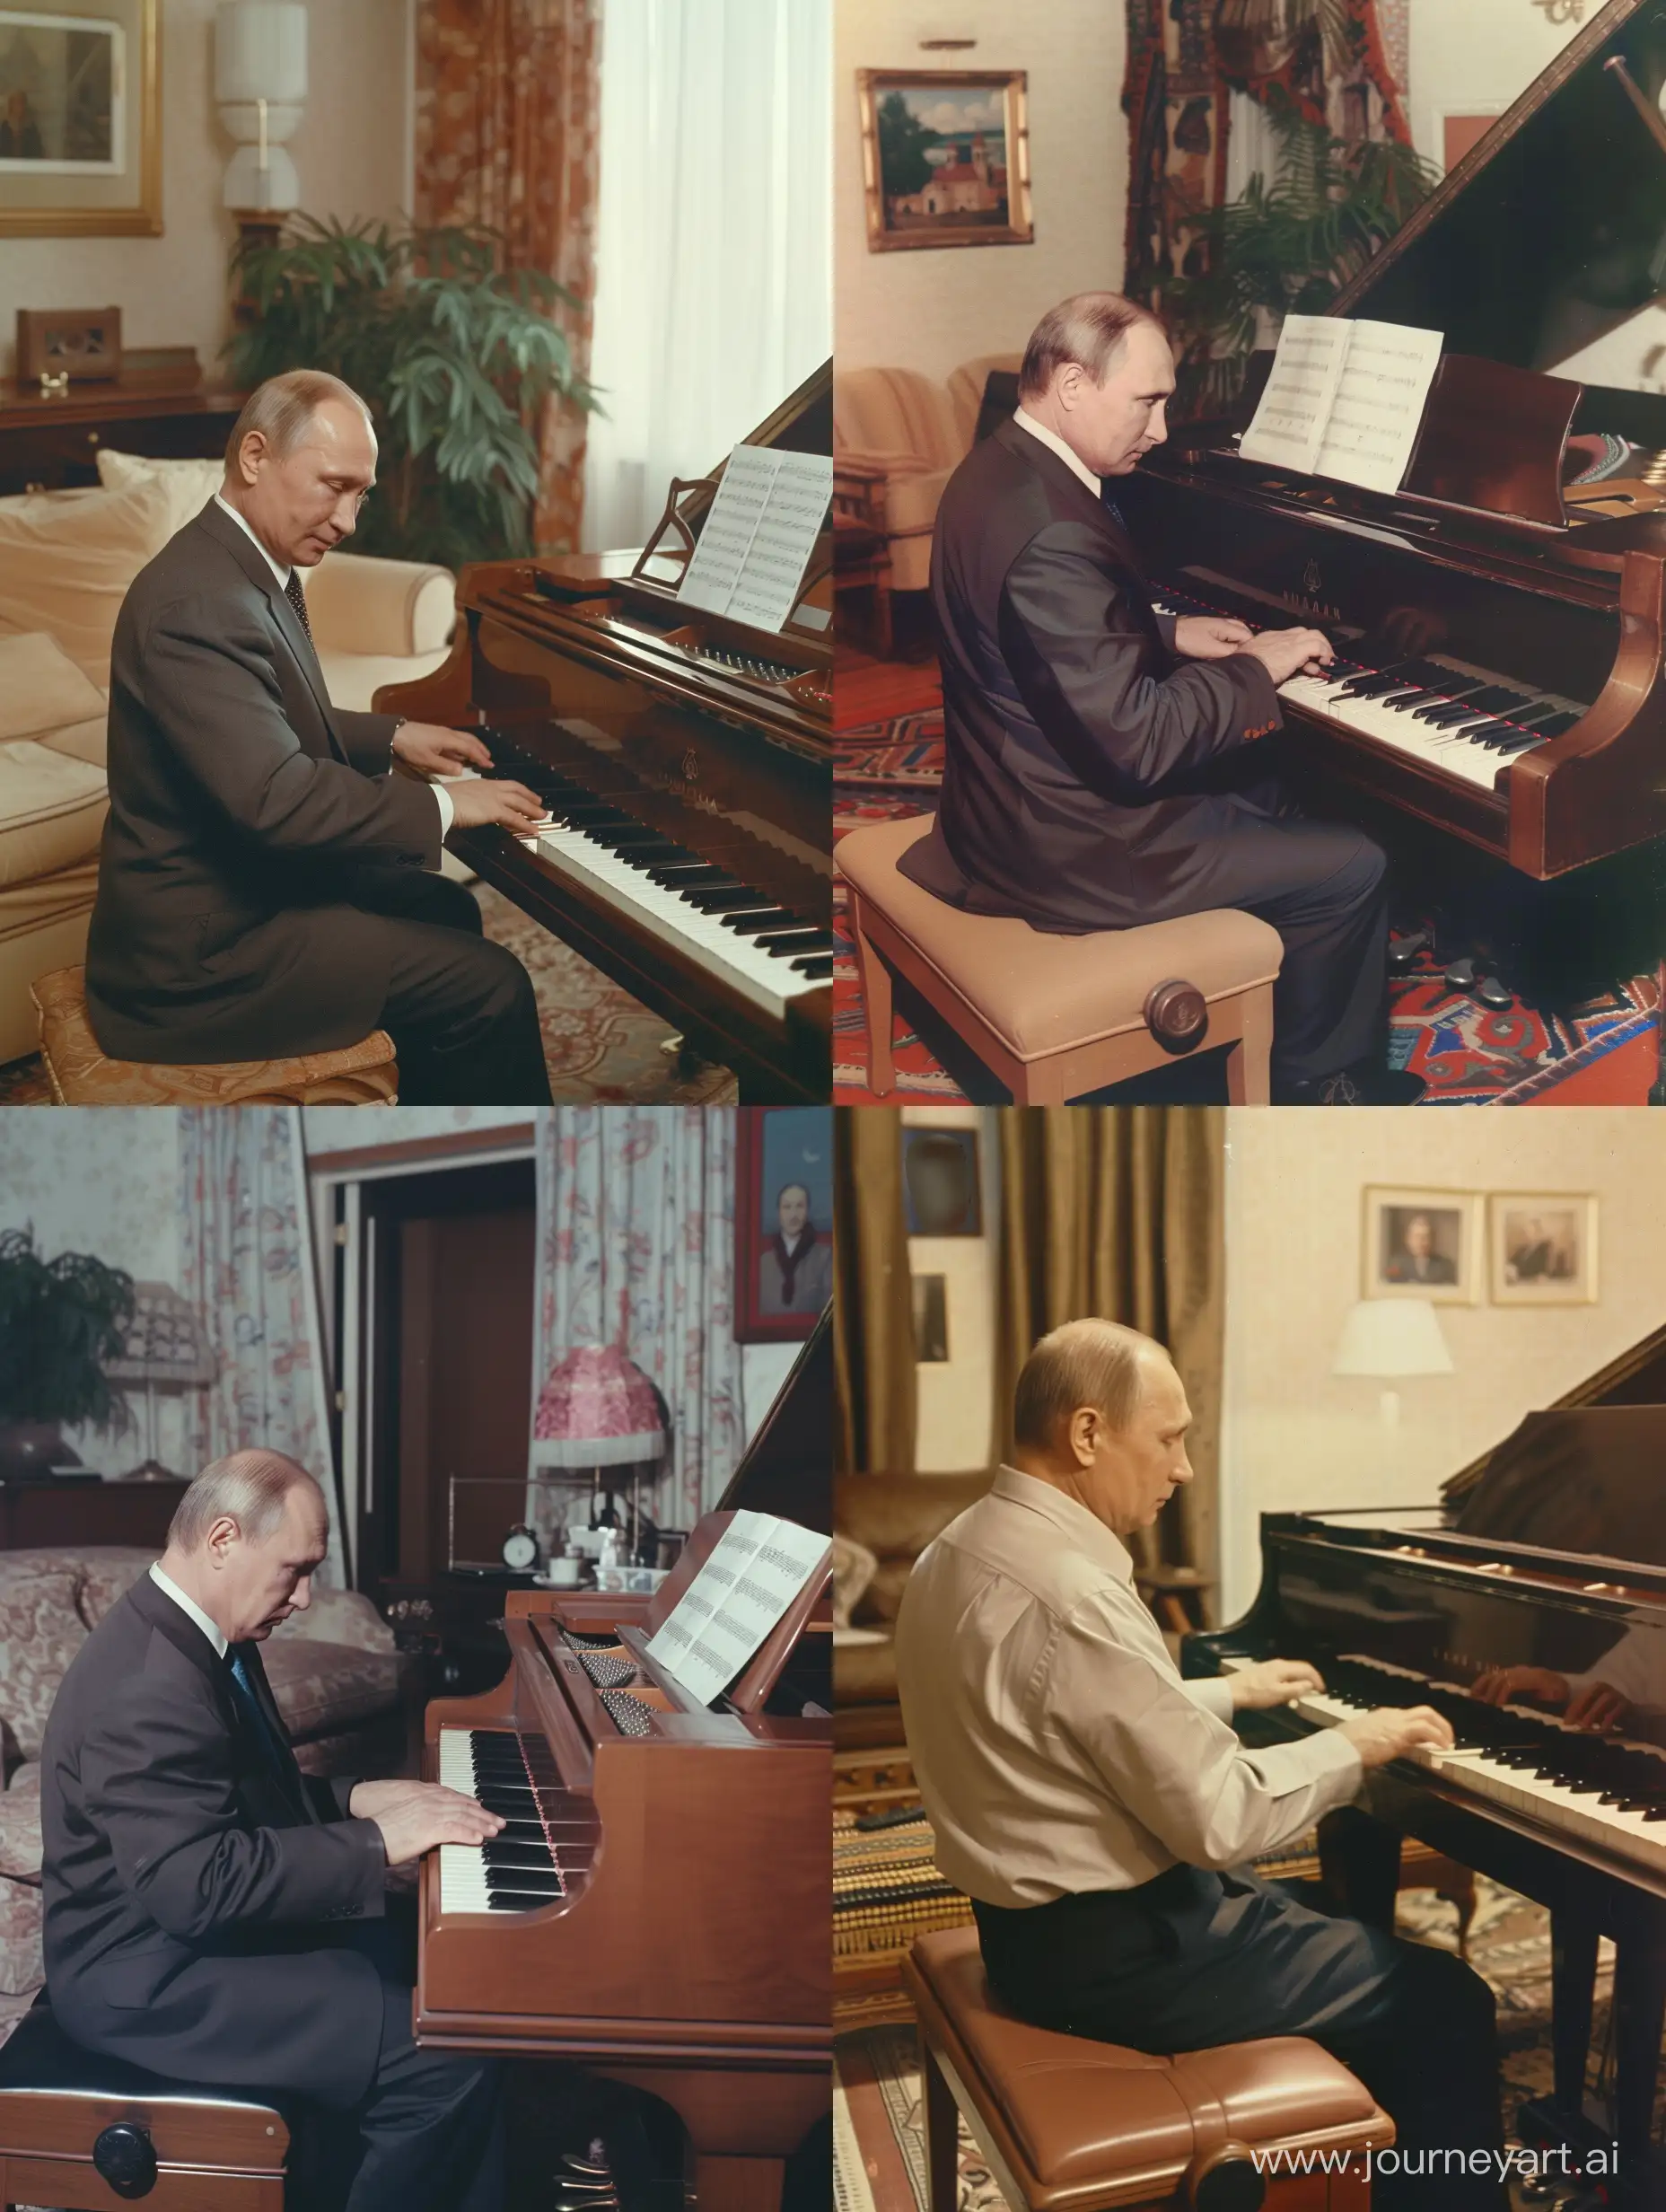 Full Color Candid Photo 1985, Phone photo of vladimir putin playing piano in a living room. He is facing the camera/ viewer. The photo was posted in 2018 on Reddit.